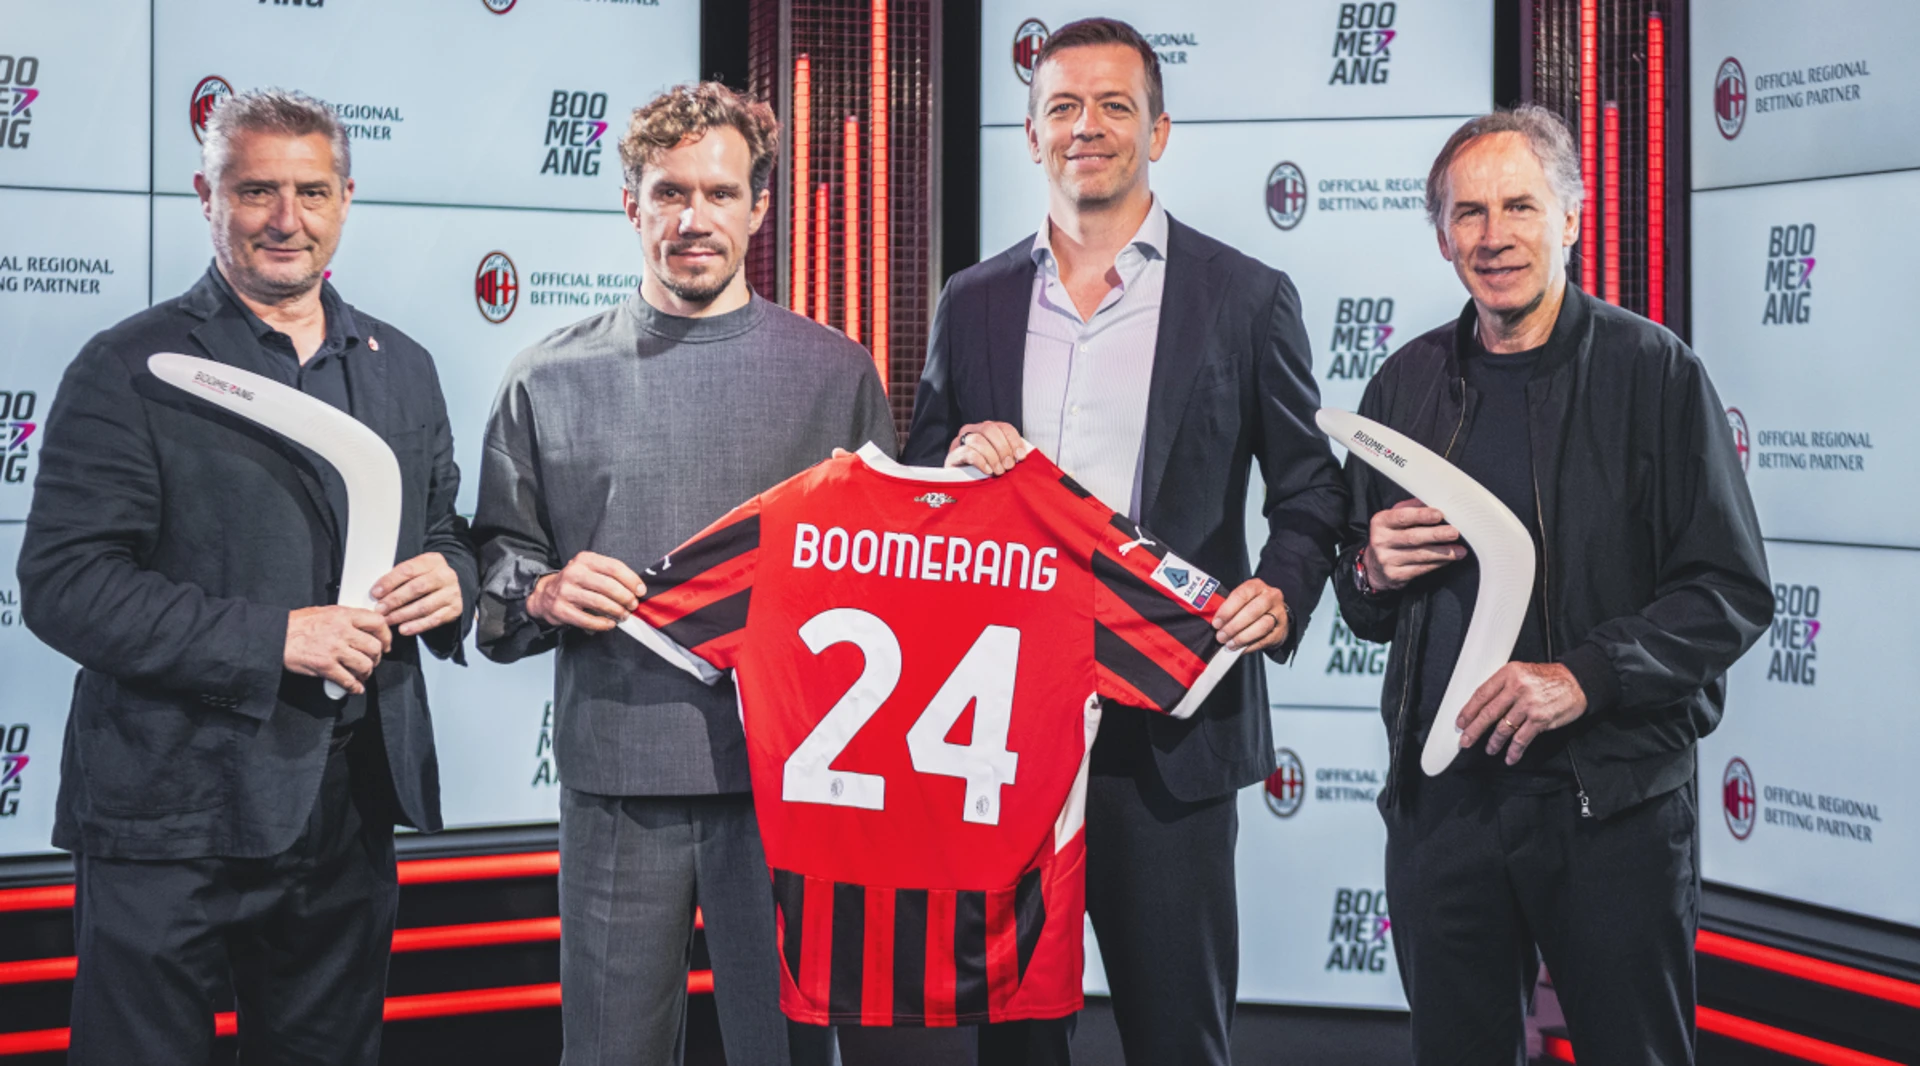 AC Milan partners with Boomerang as official regional betting partner